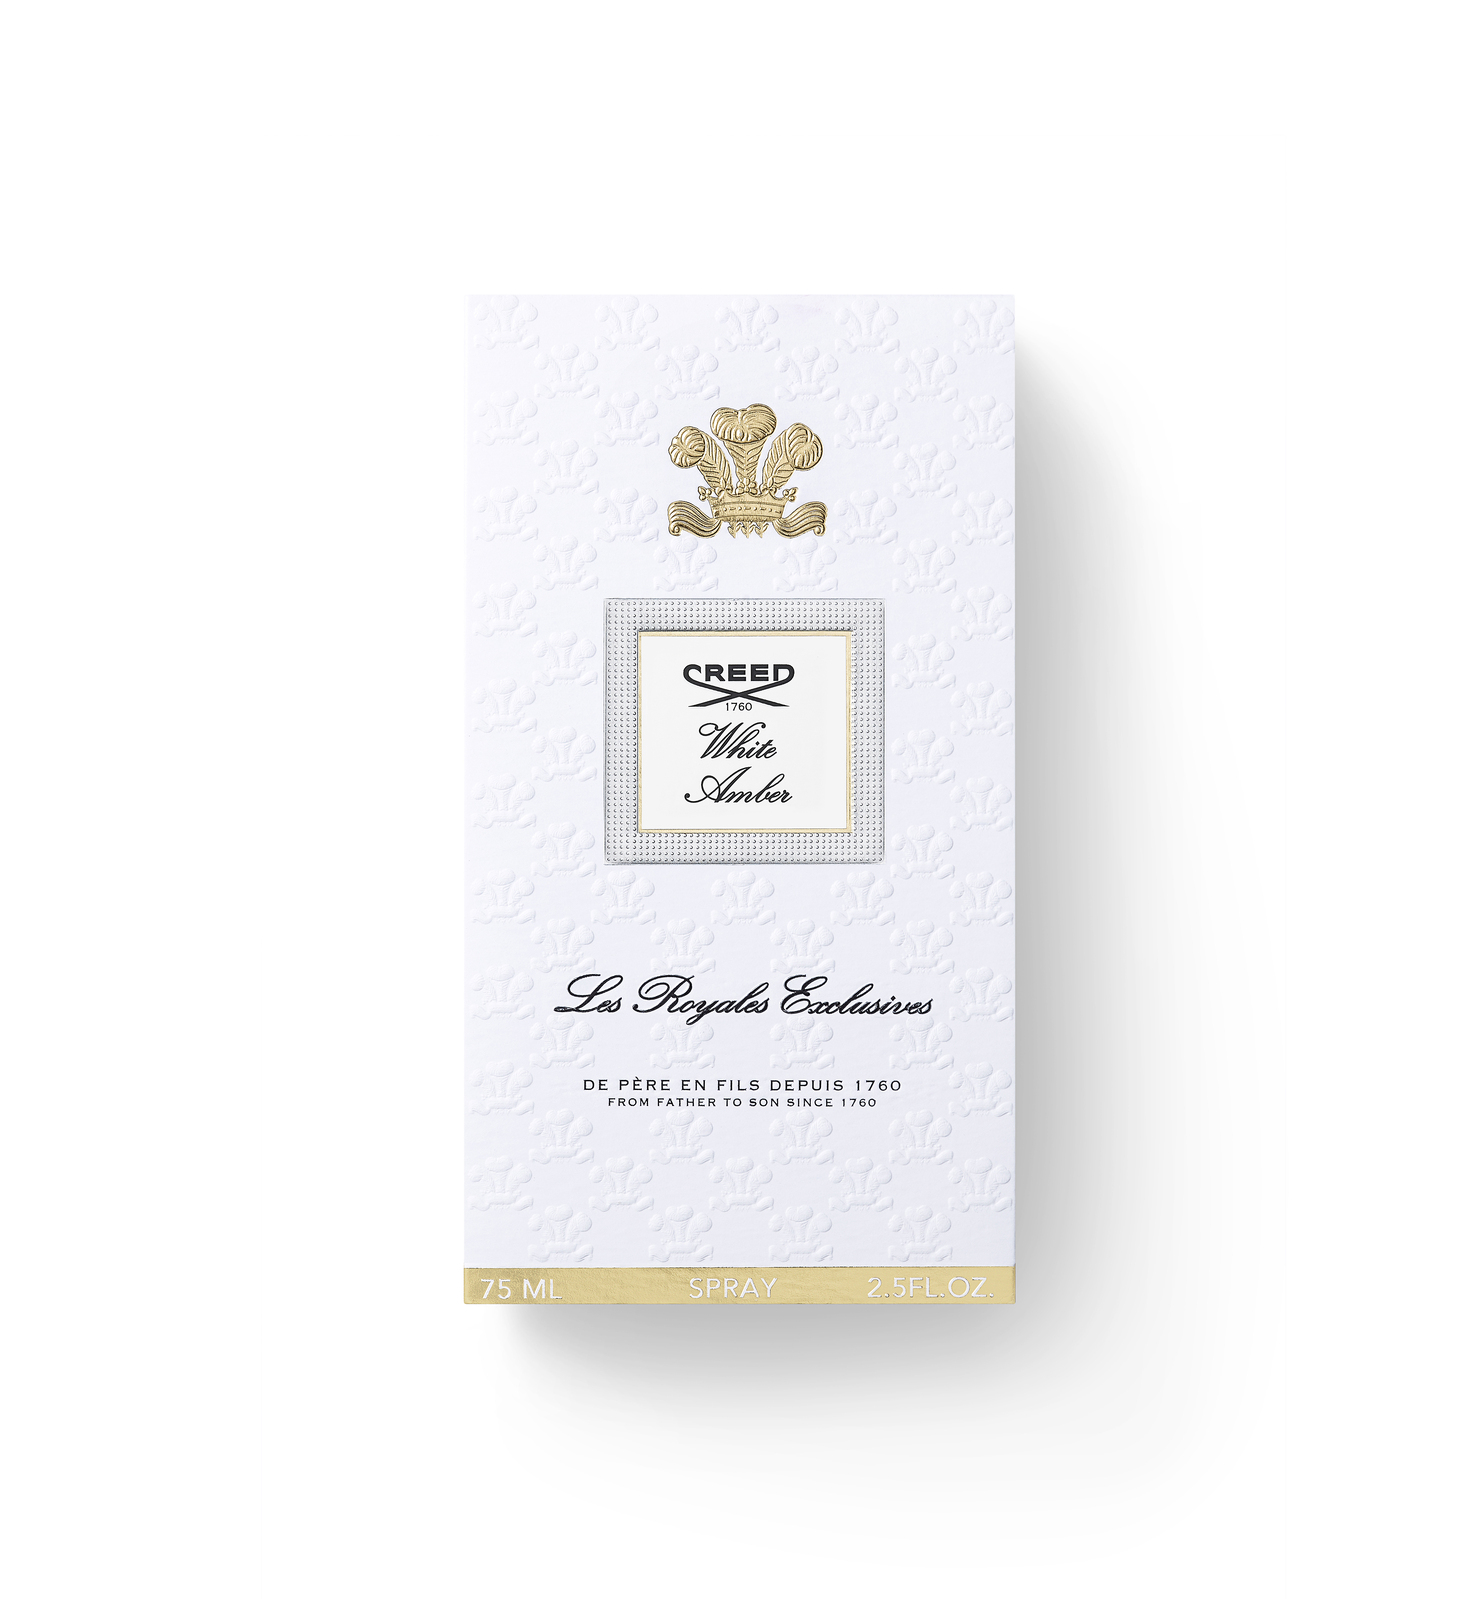 Creed Les Royales Exclusives White Amber EDP 75ml